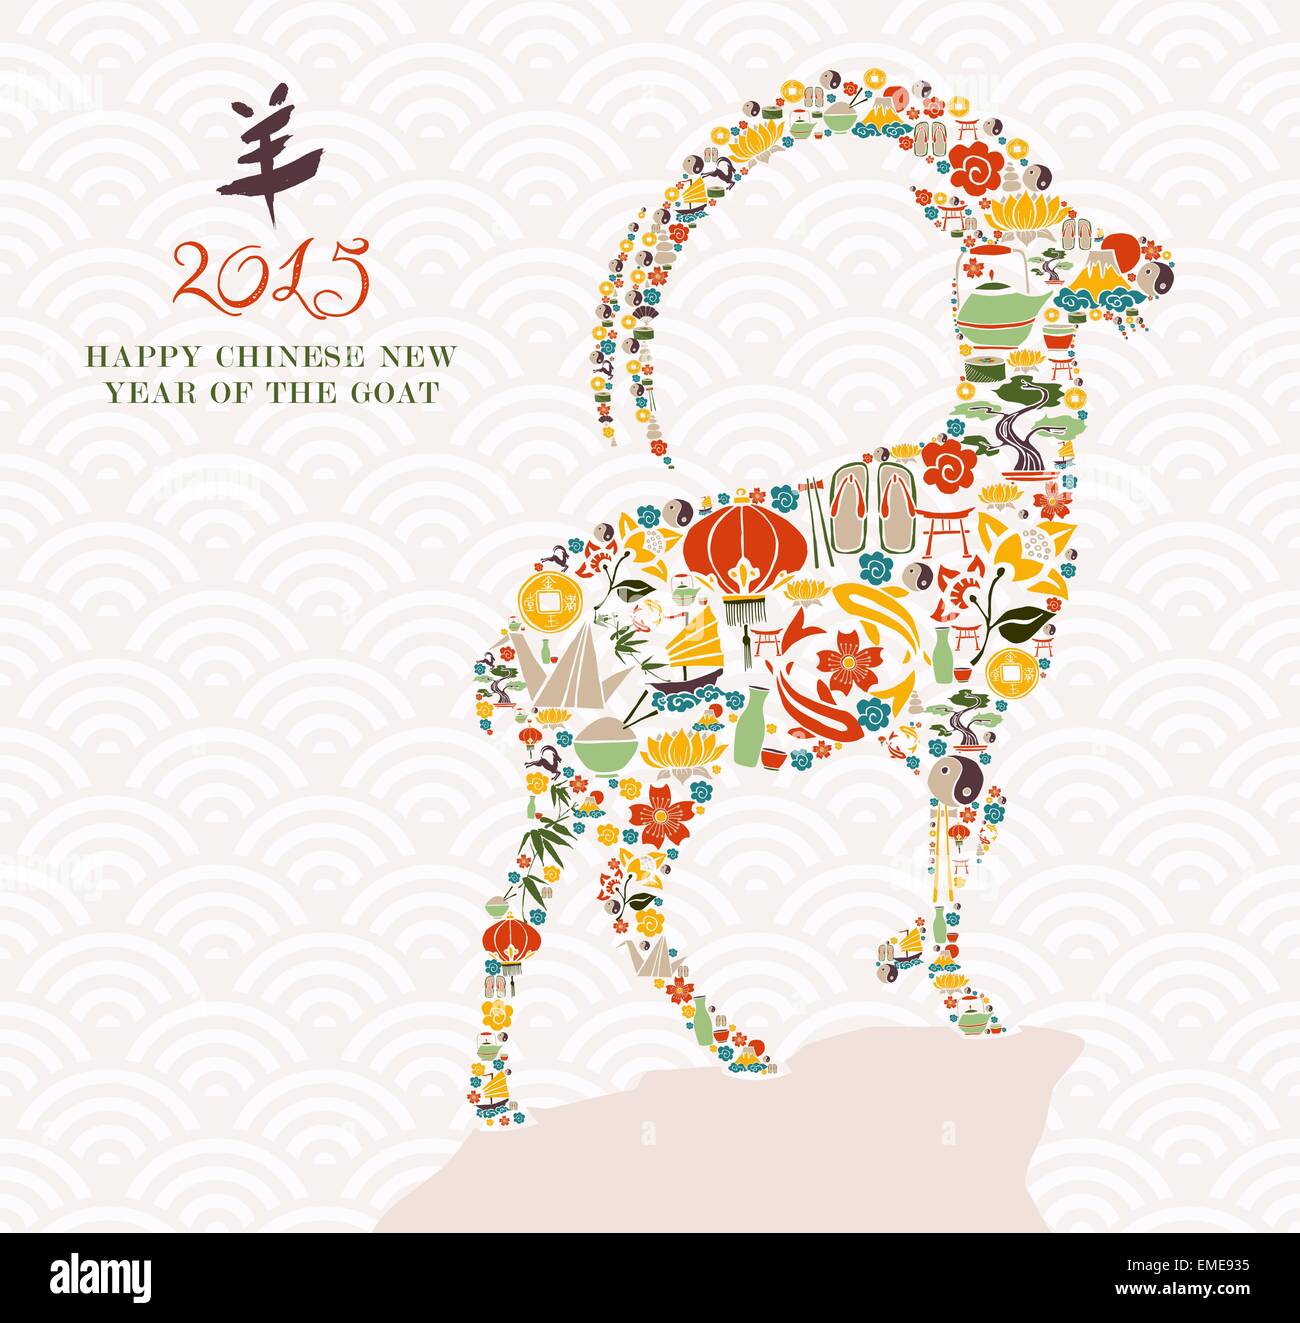 2015 New year of the Goat Stock Vector